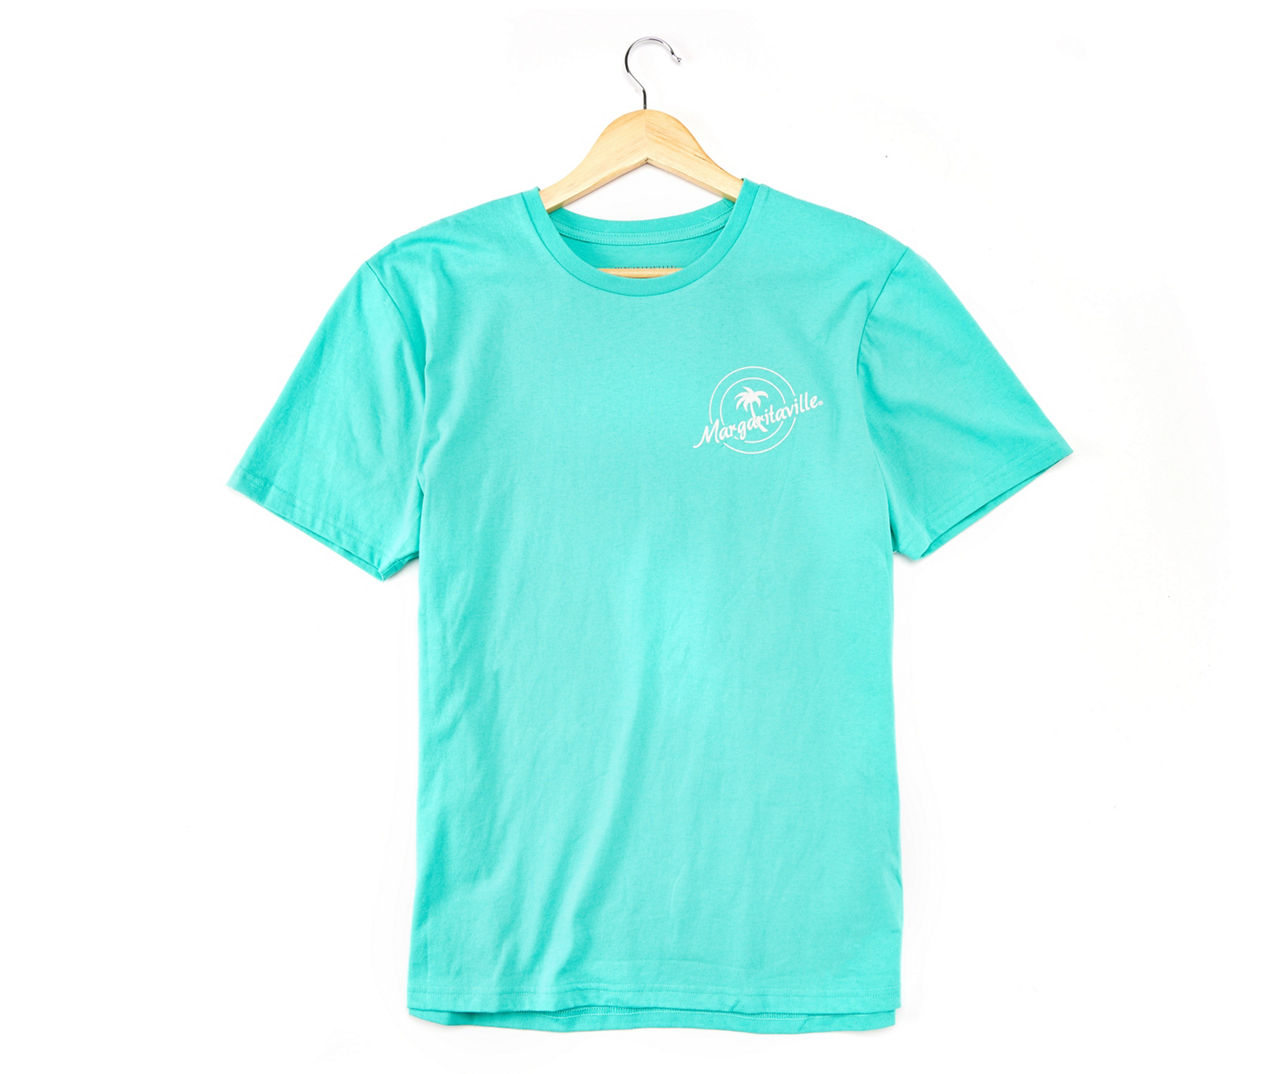 Men's Size X-Large Livin' for the Weekend Turquoise Crewneck Tee